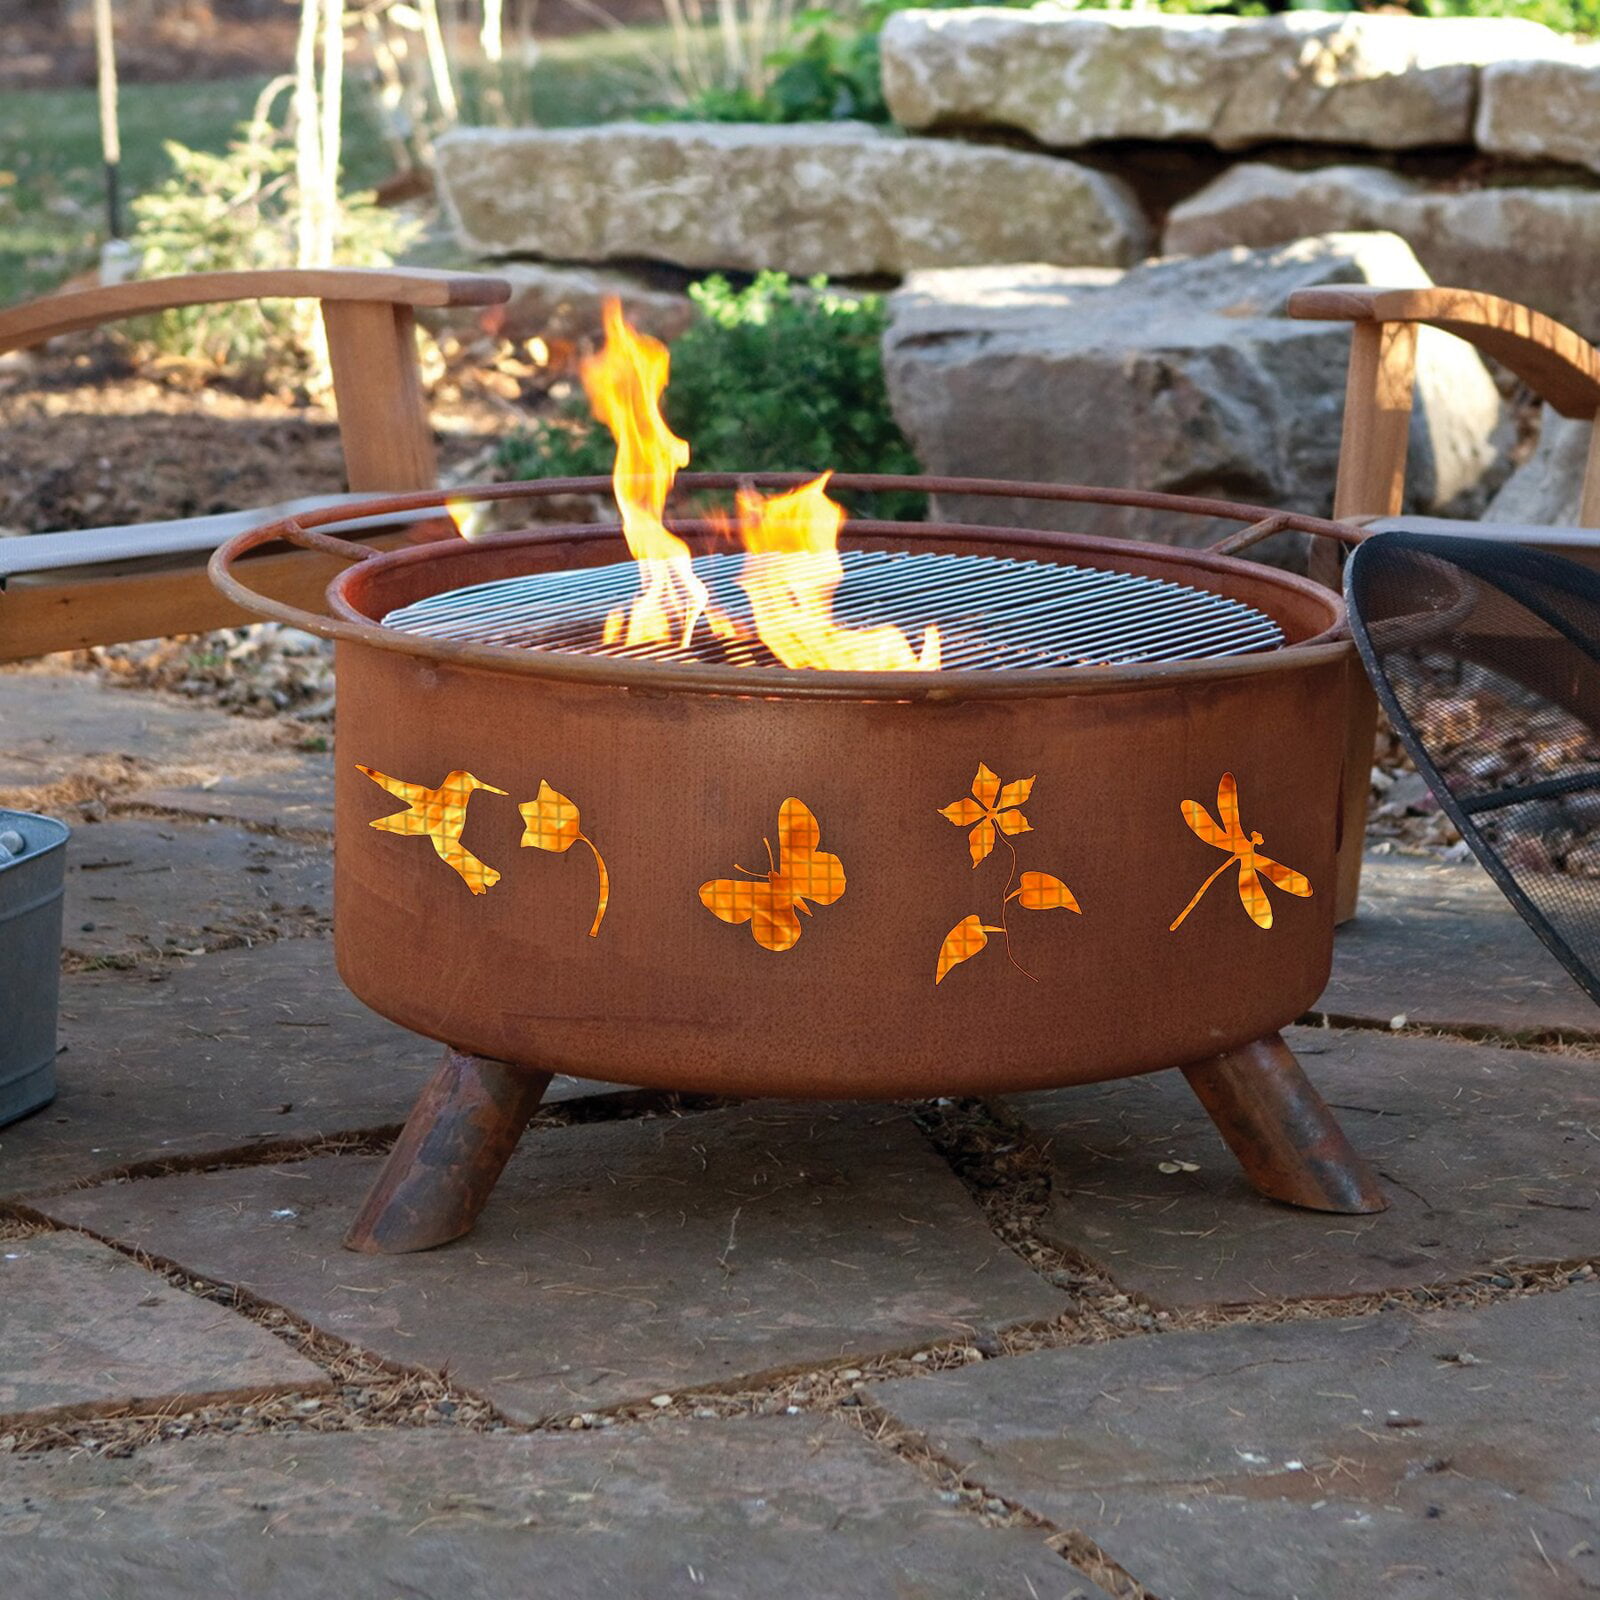 Jardine Flower and Garden Steel Wood Burning Fire Pit, Portable design  allows fire pit to be moved easily, Flower and Garden cut outs provide safe  ventilation with a protective inner spark screen -